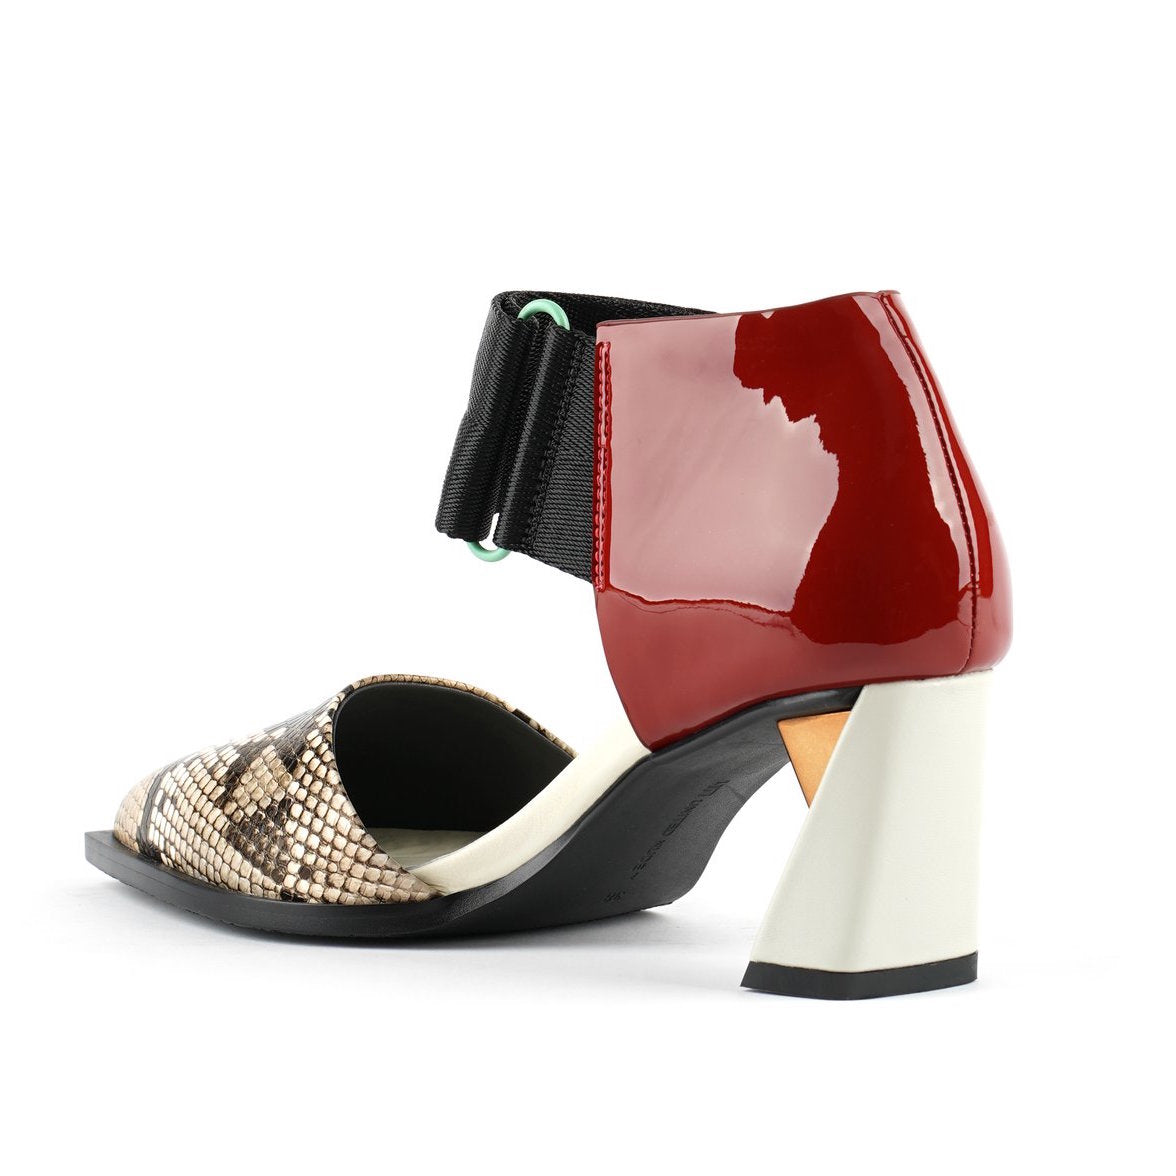 Inner back view of the united nude vita dorsey mid viper. This sandal has a pointed toe in snake skin and a red patent leather covered with a wide nylon adjustable strap around the front of the ankle. This sandal has a mid-heel with a gold and silver accent.